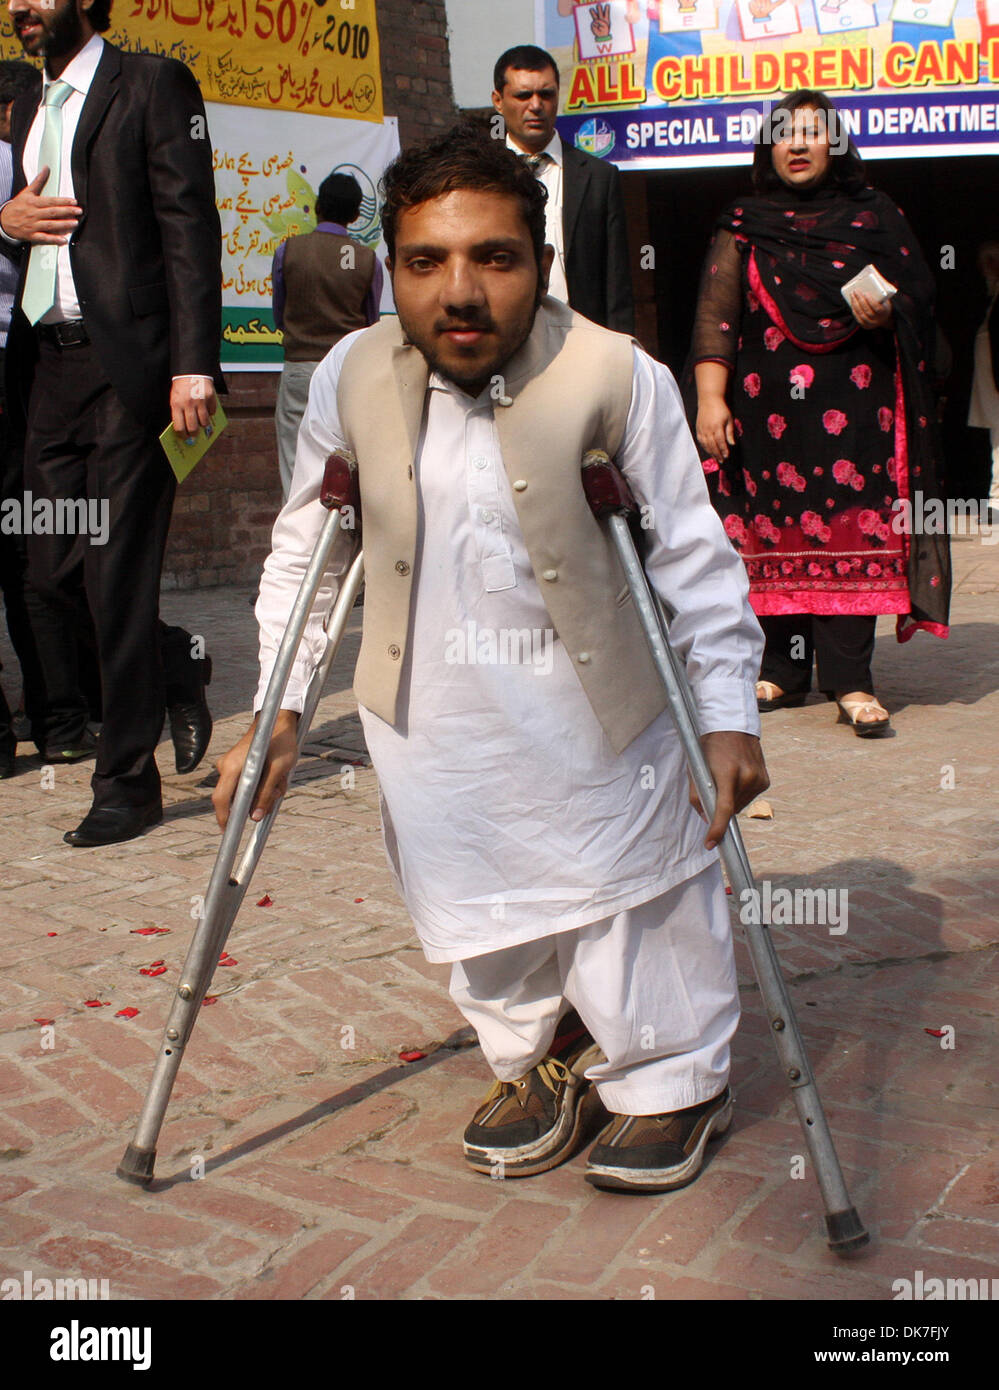 Lahore, Pakistan. 3rd Dec 2013. A disabled man poses for a photo on the International Day of Persons with Disabilities Credit: © Xinhua/Alamy Live News  Stock Photo